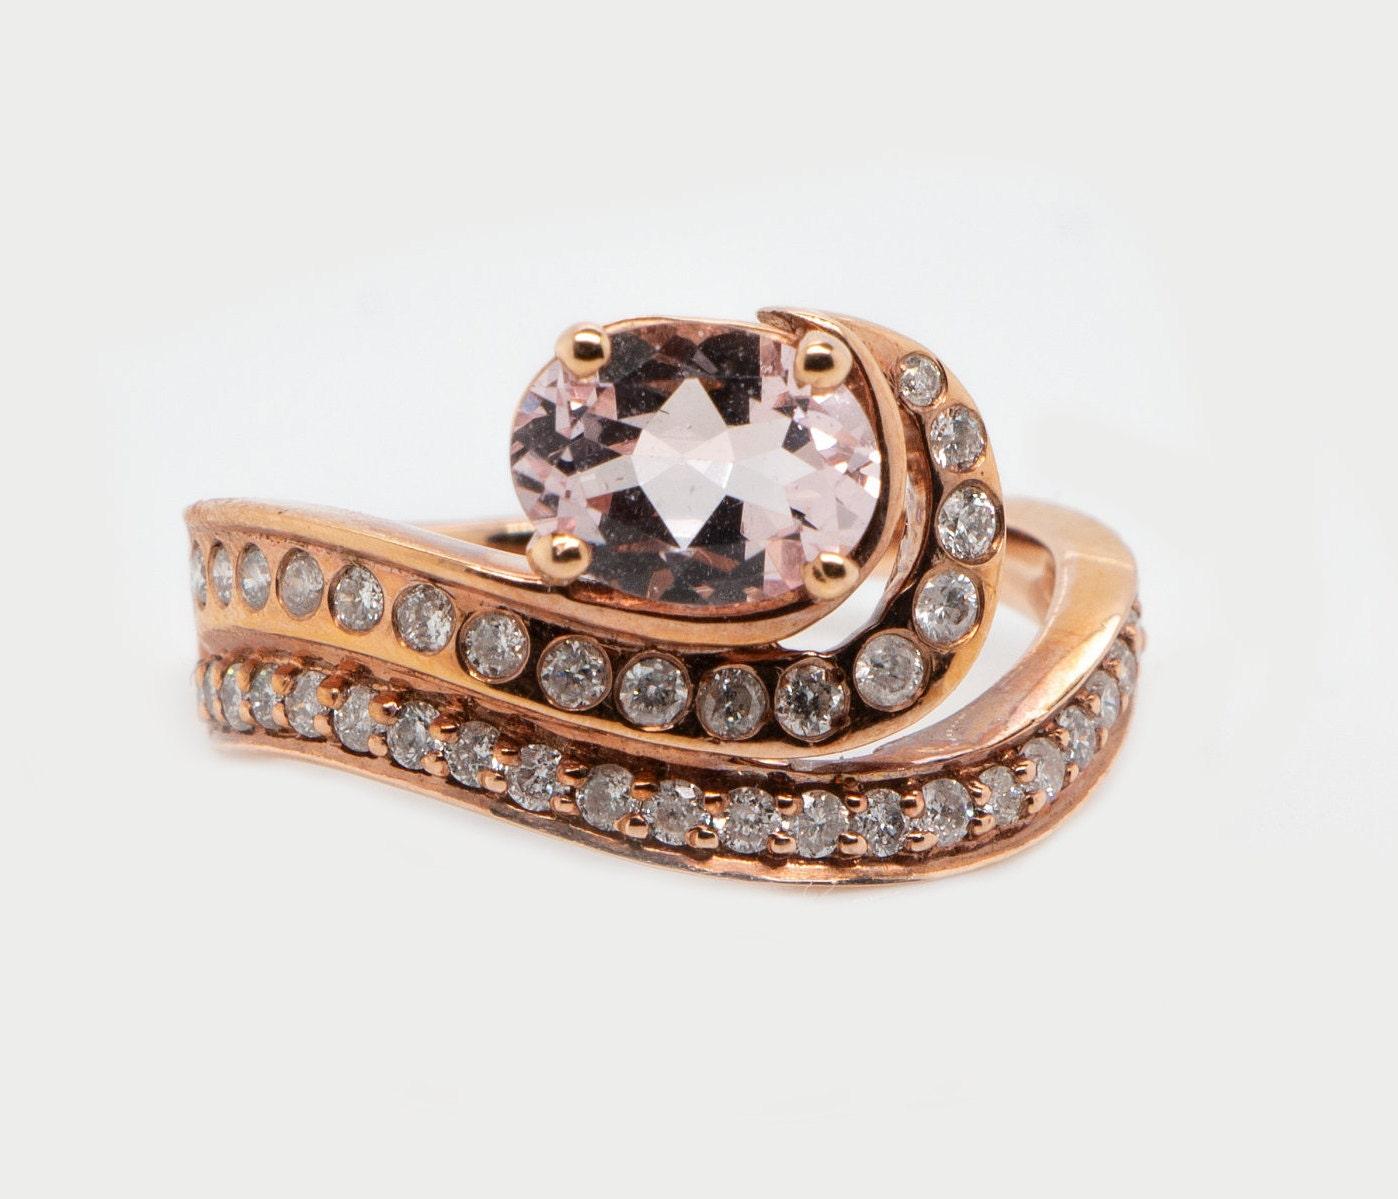 This is a magnificent natural morganite and diamond halo ring set in solid 14K rose gold. The natural and large 8X6MM 1.14Ct Morganite oval has an excellent peachy pink color (AAA quality gem) and is set on top of a curved diamond-encrusted shank